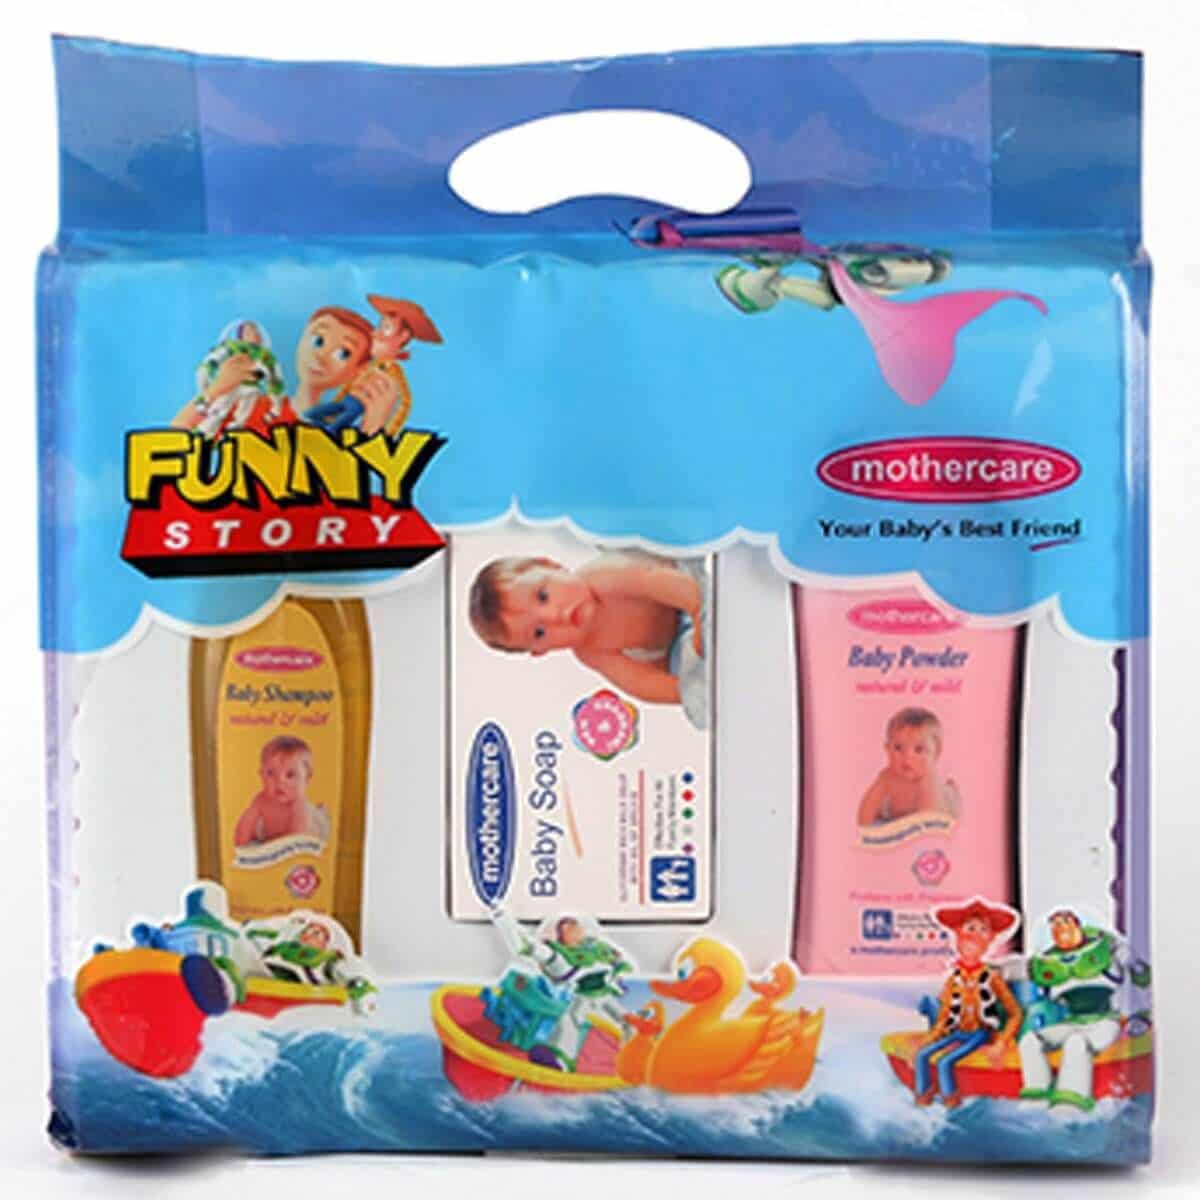 MOTHERCARE FUNNY STORY GIFT BOX 245GMS